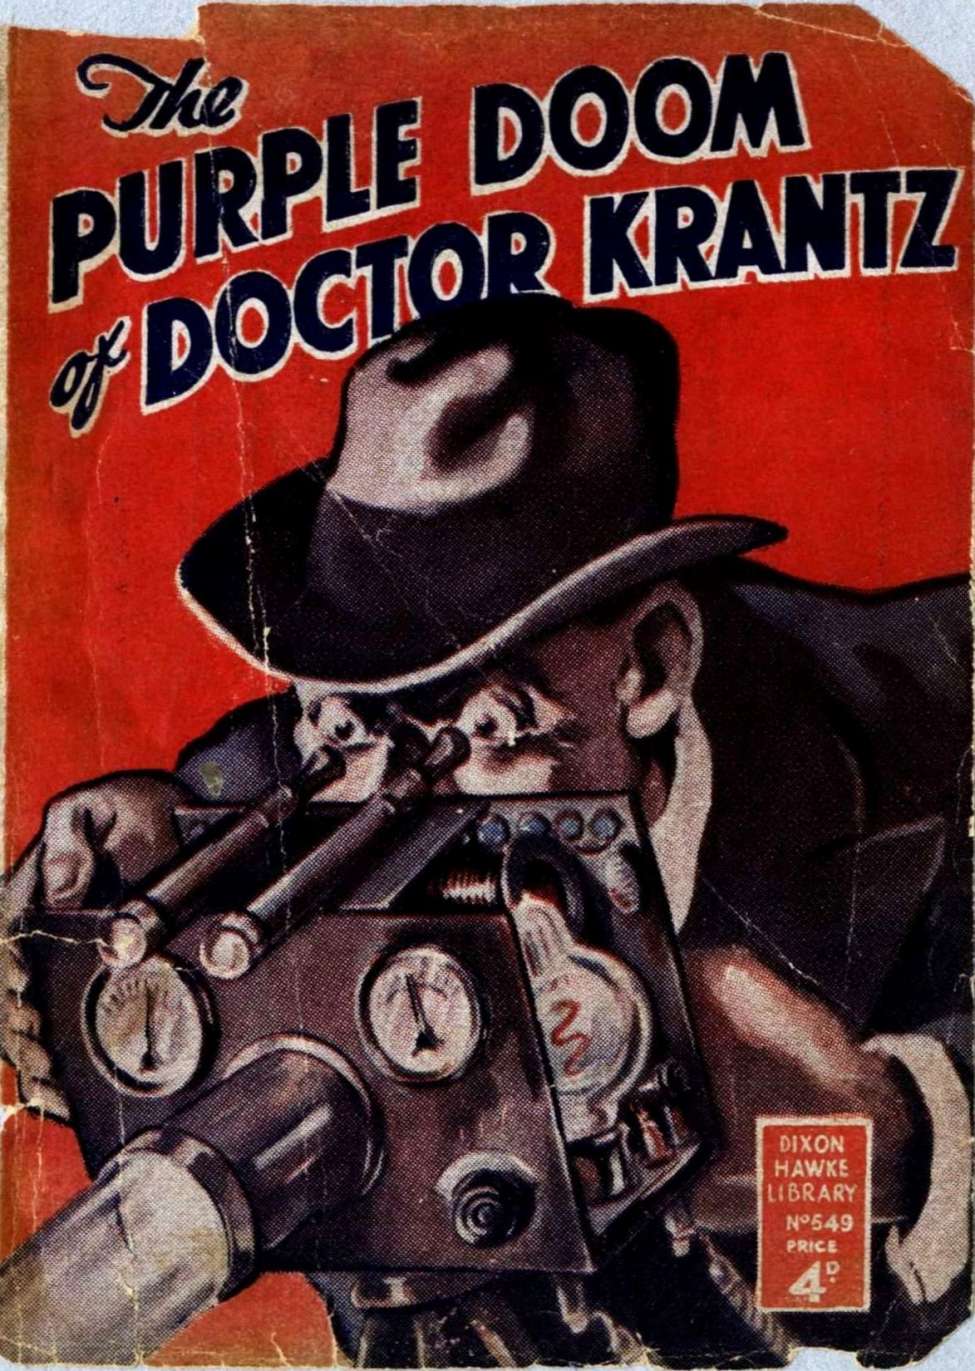 Book Cover For Dixon Hawke Library 549 - The Purple Doom of Doctor Krantz